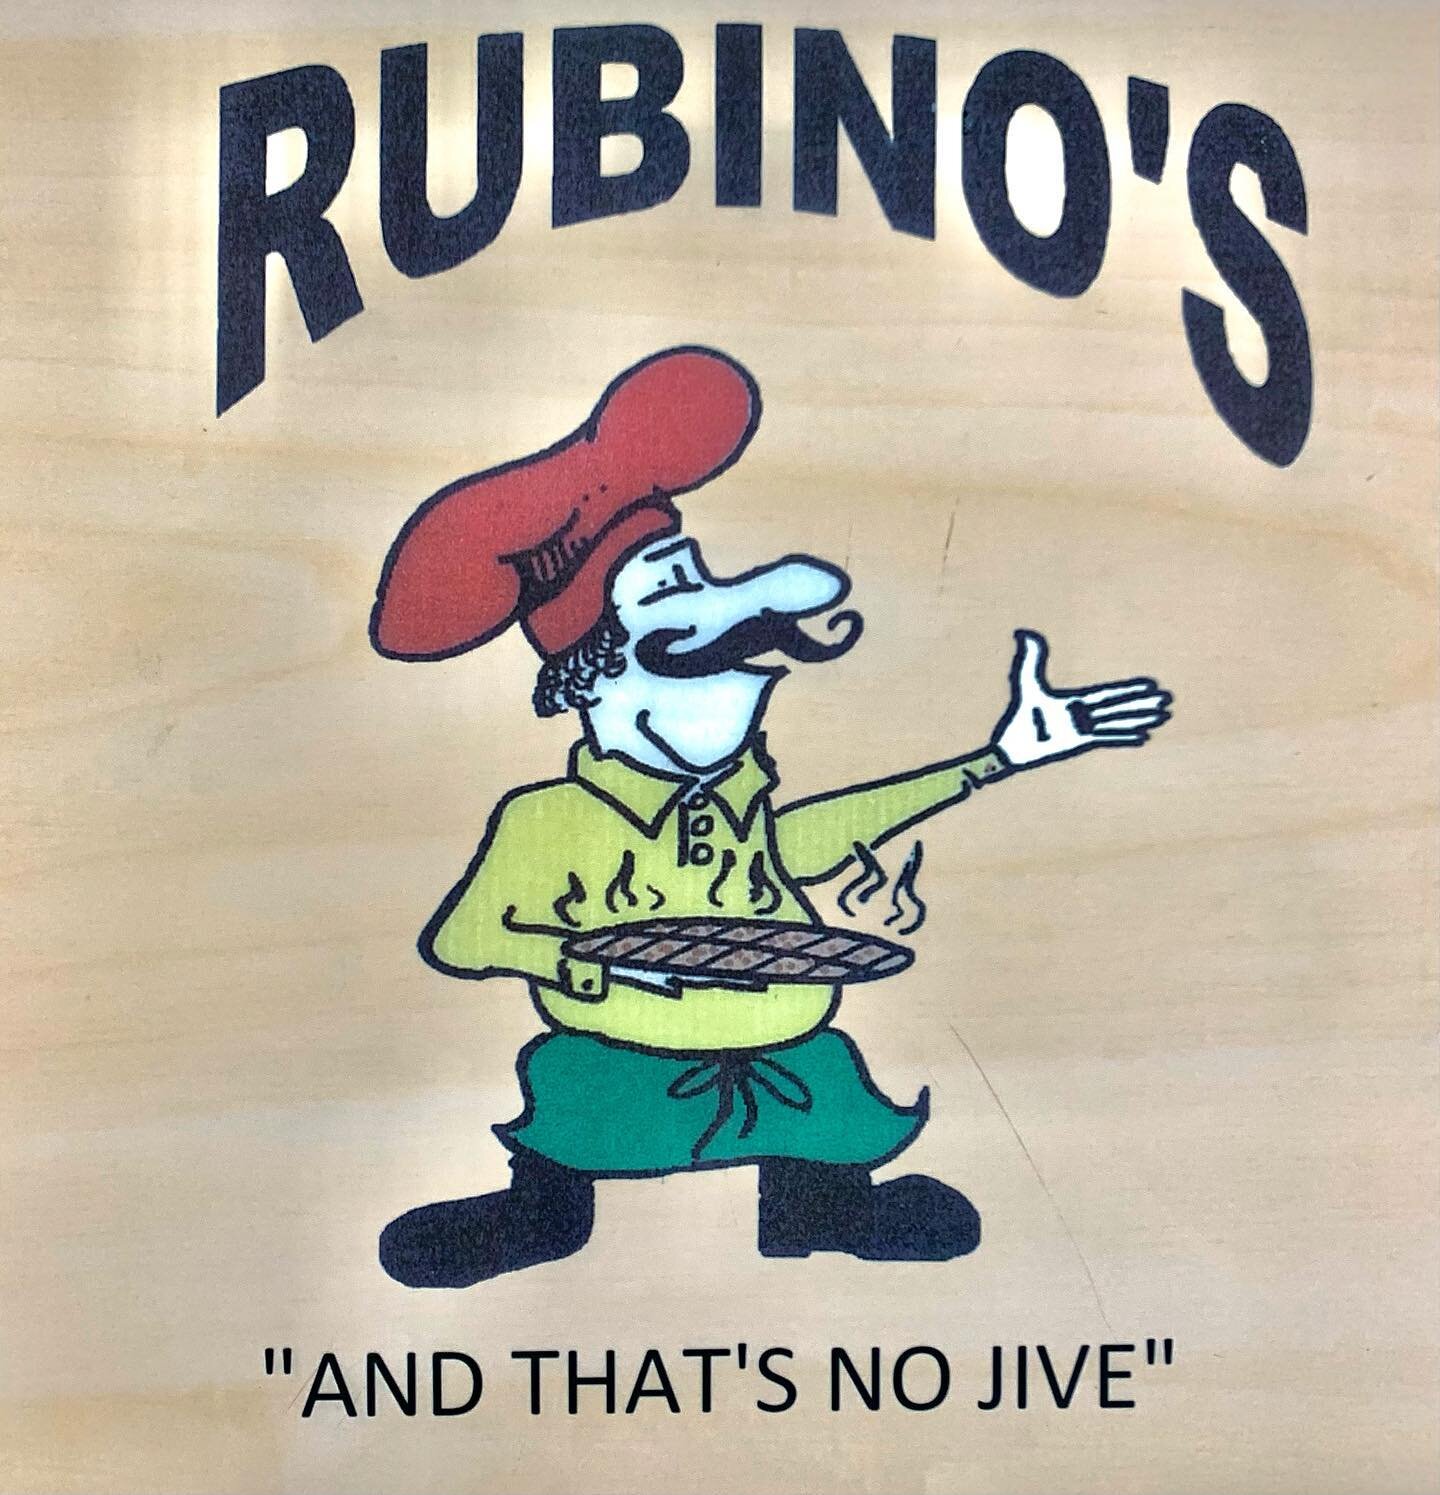 Bino wants to welcome you to the weekend and remind you that Rubino&rsquo;s is open Friday, Saturday and Sunday from 4-9! Give us a call to place an order!
.
.
.
#supportsmallbusiness #columbuspizza #columbusfoodscene #bexleyohio #pizza